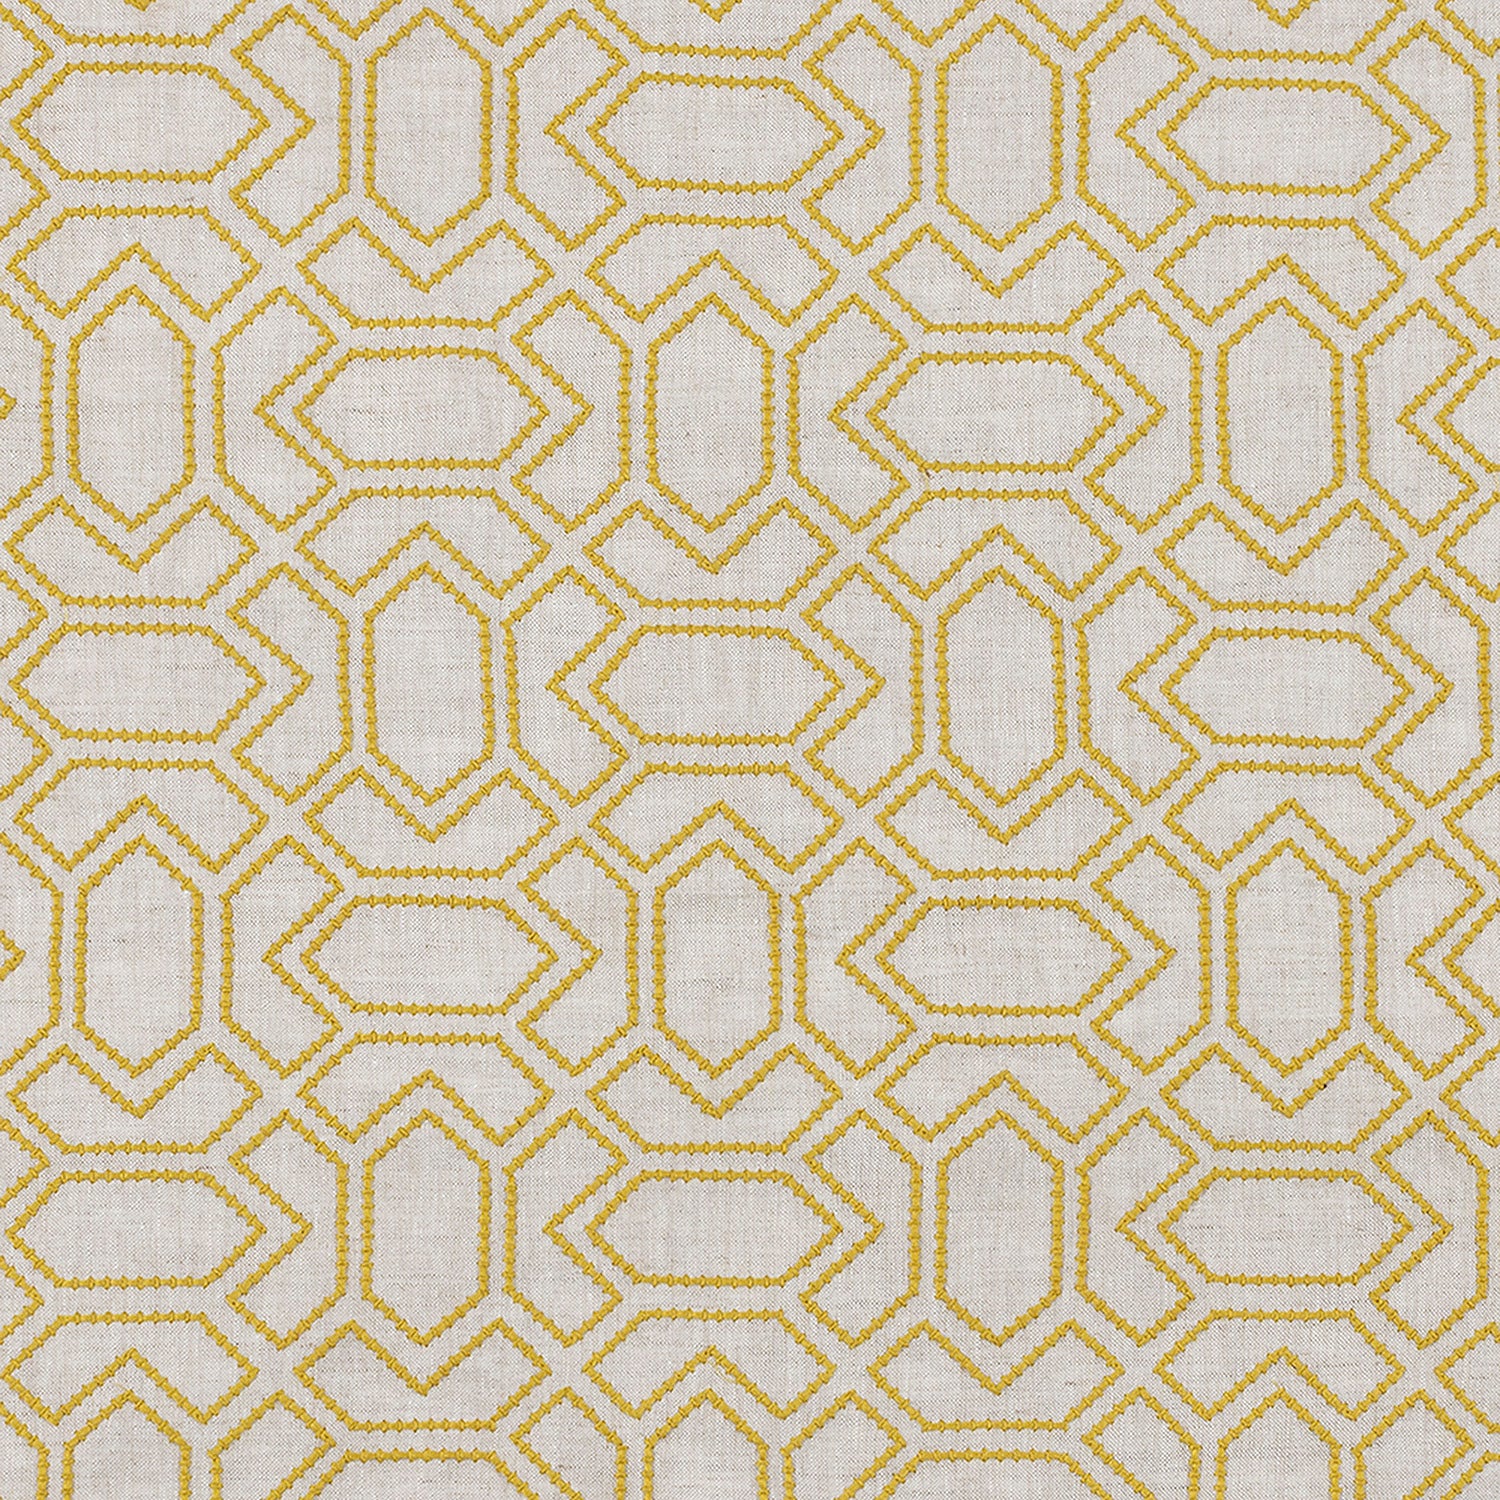 Fabric with an embroidered geometric grid print in mustard on a light gray field.